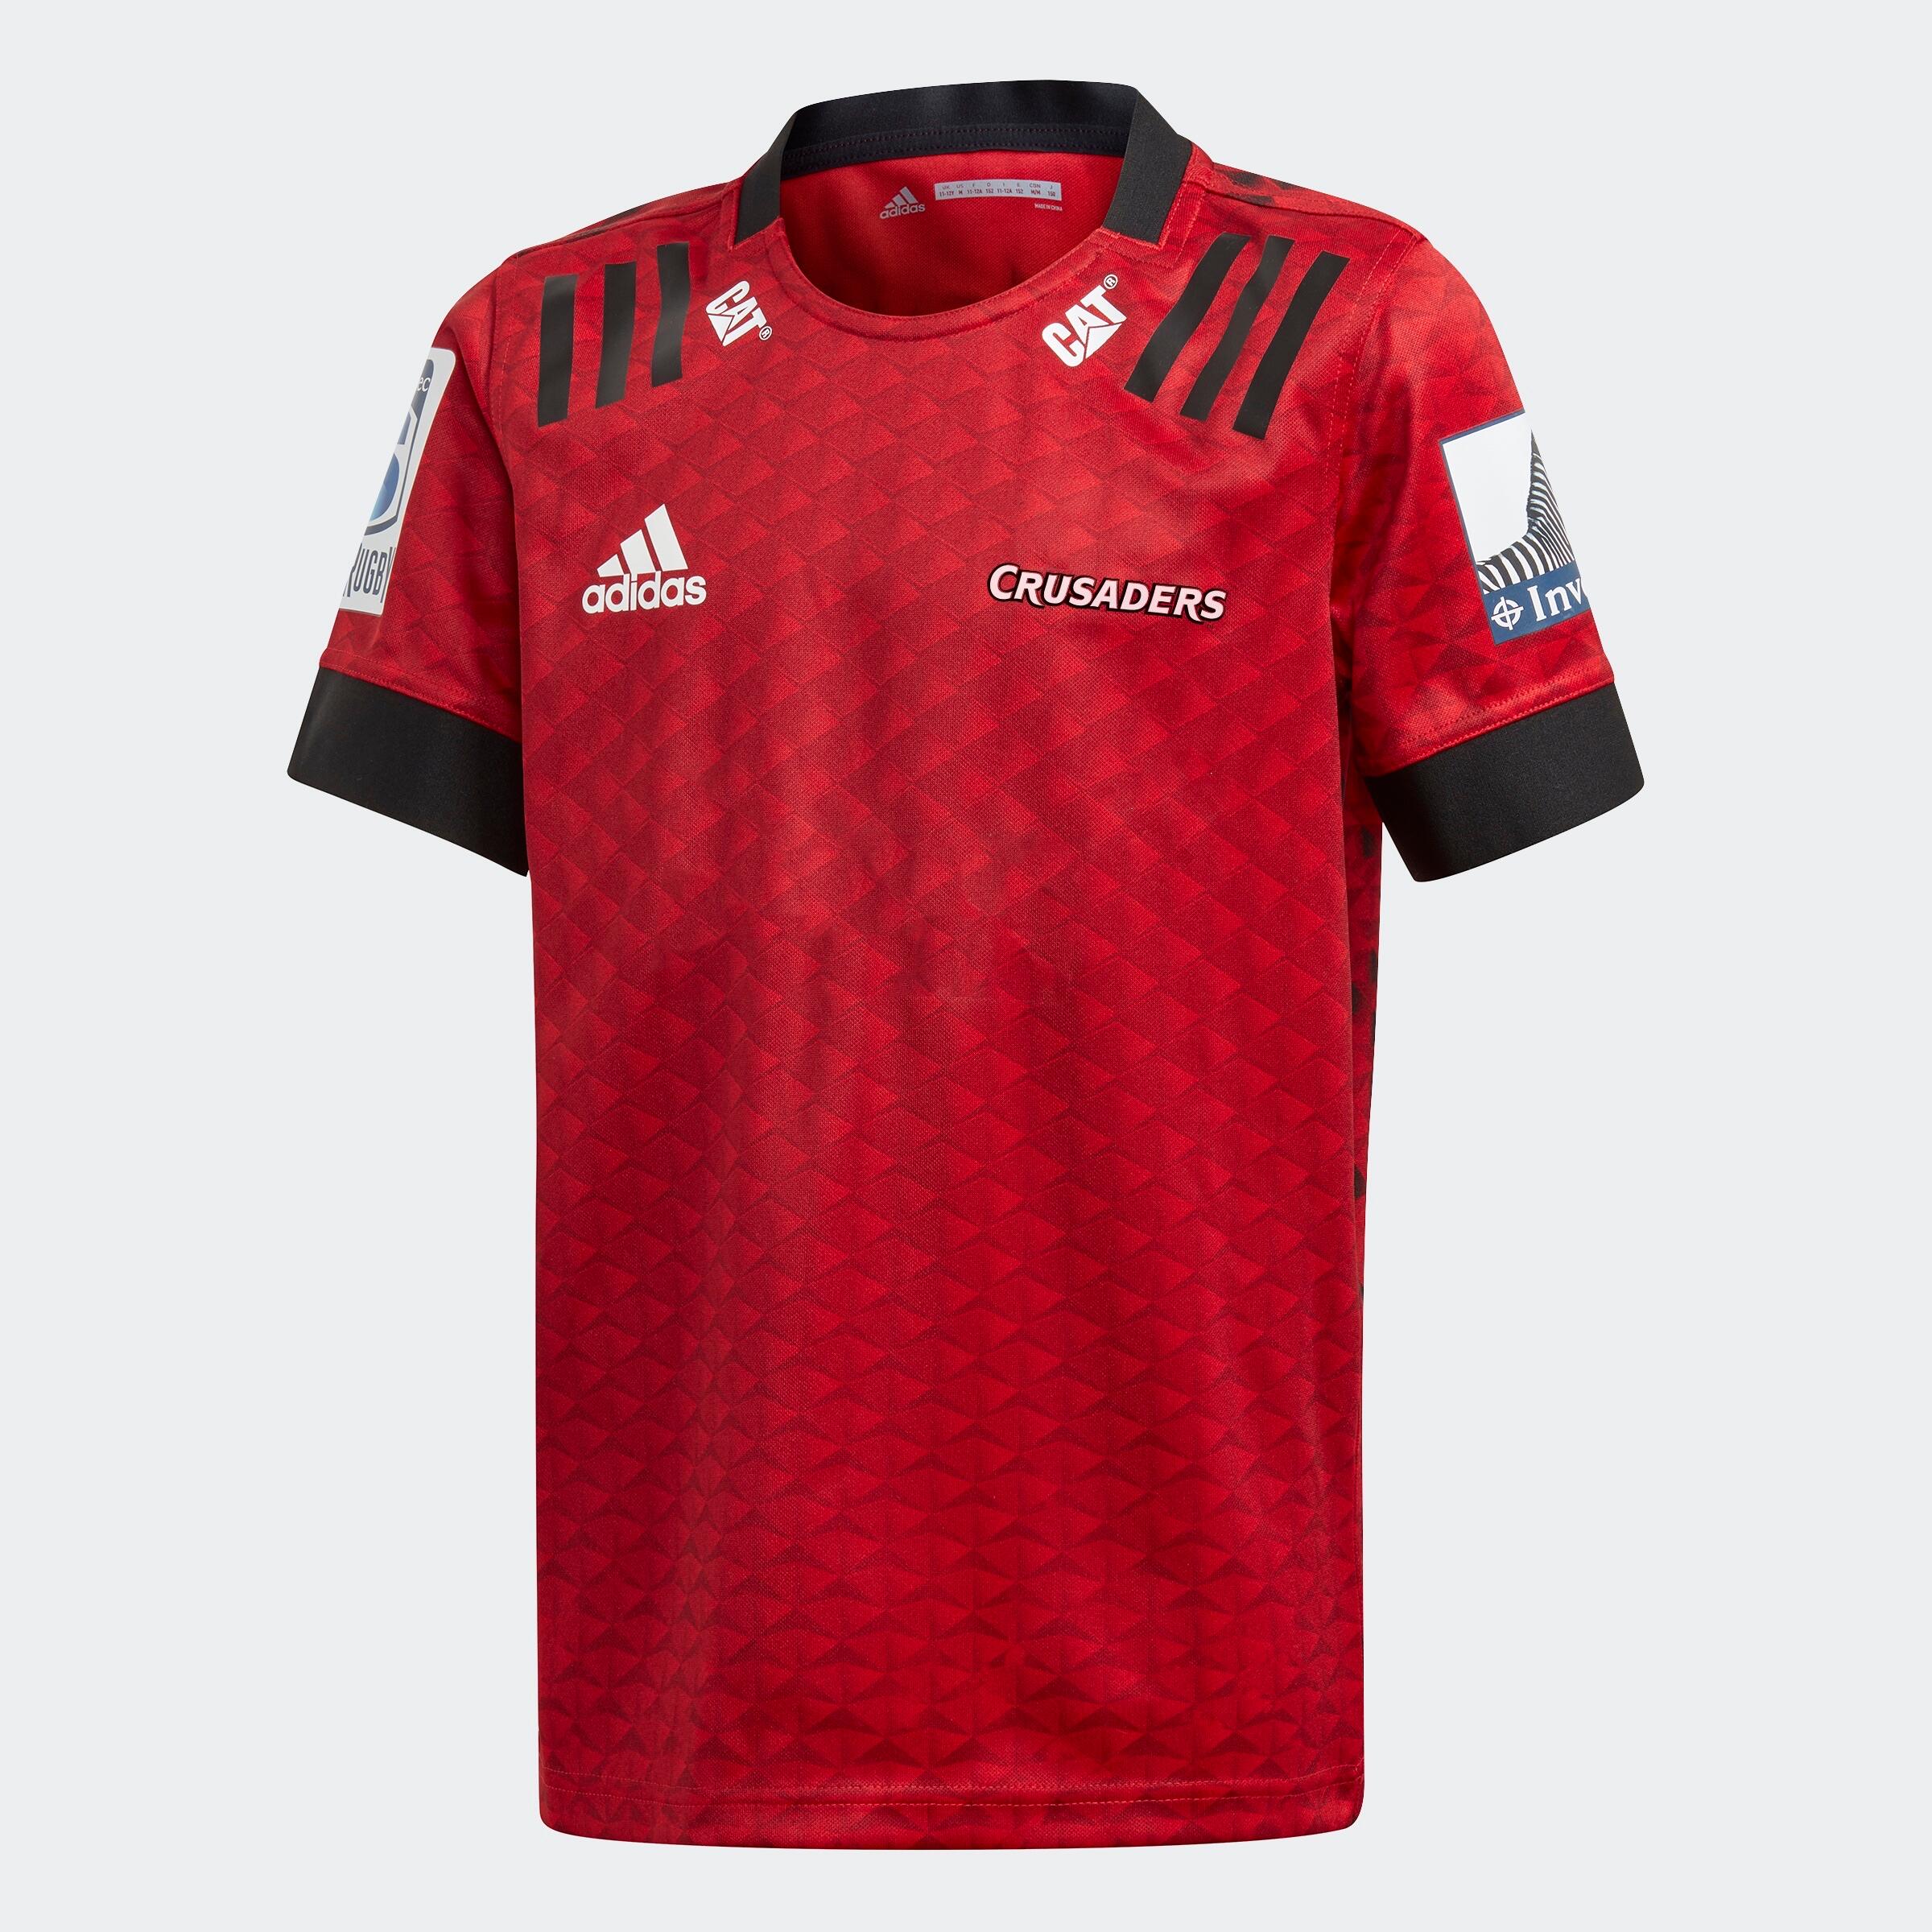 adidas Crusaders Kids Home Rugby Shirt ED7948 Red 1/4